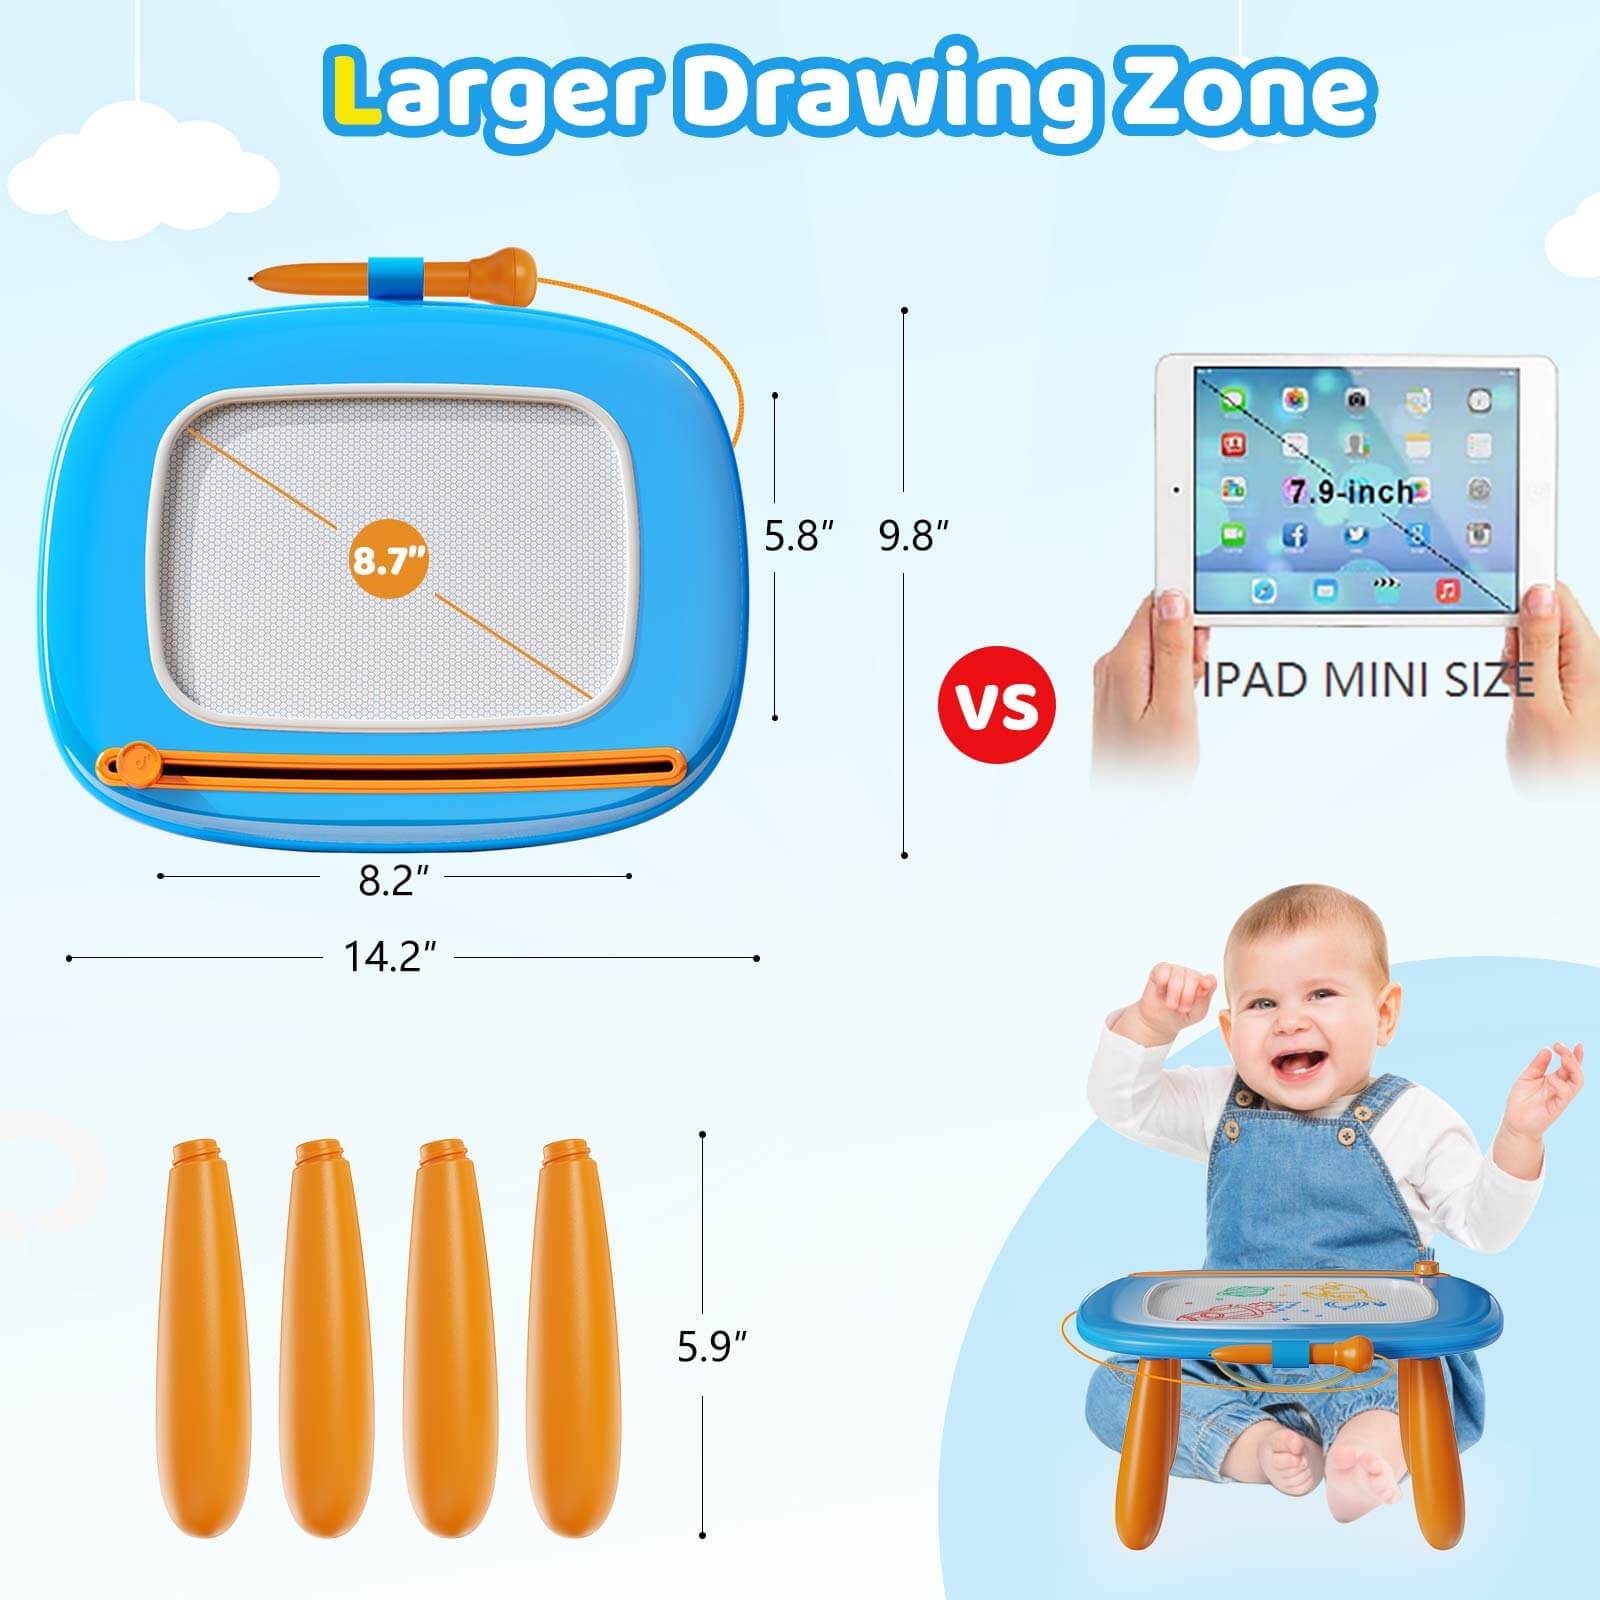 KIKIDEX Toddlers Toys Age 1-3, Magnetic Drawing Board, Toddler